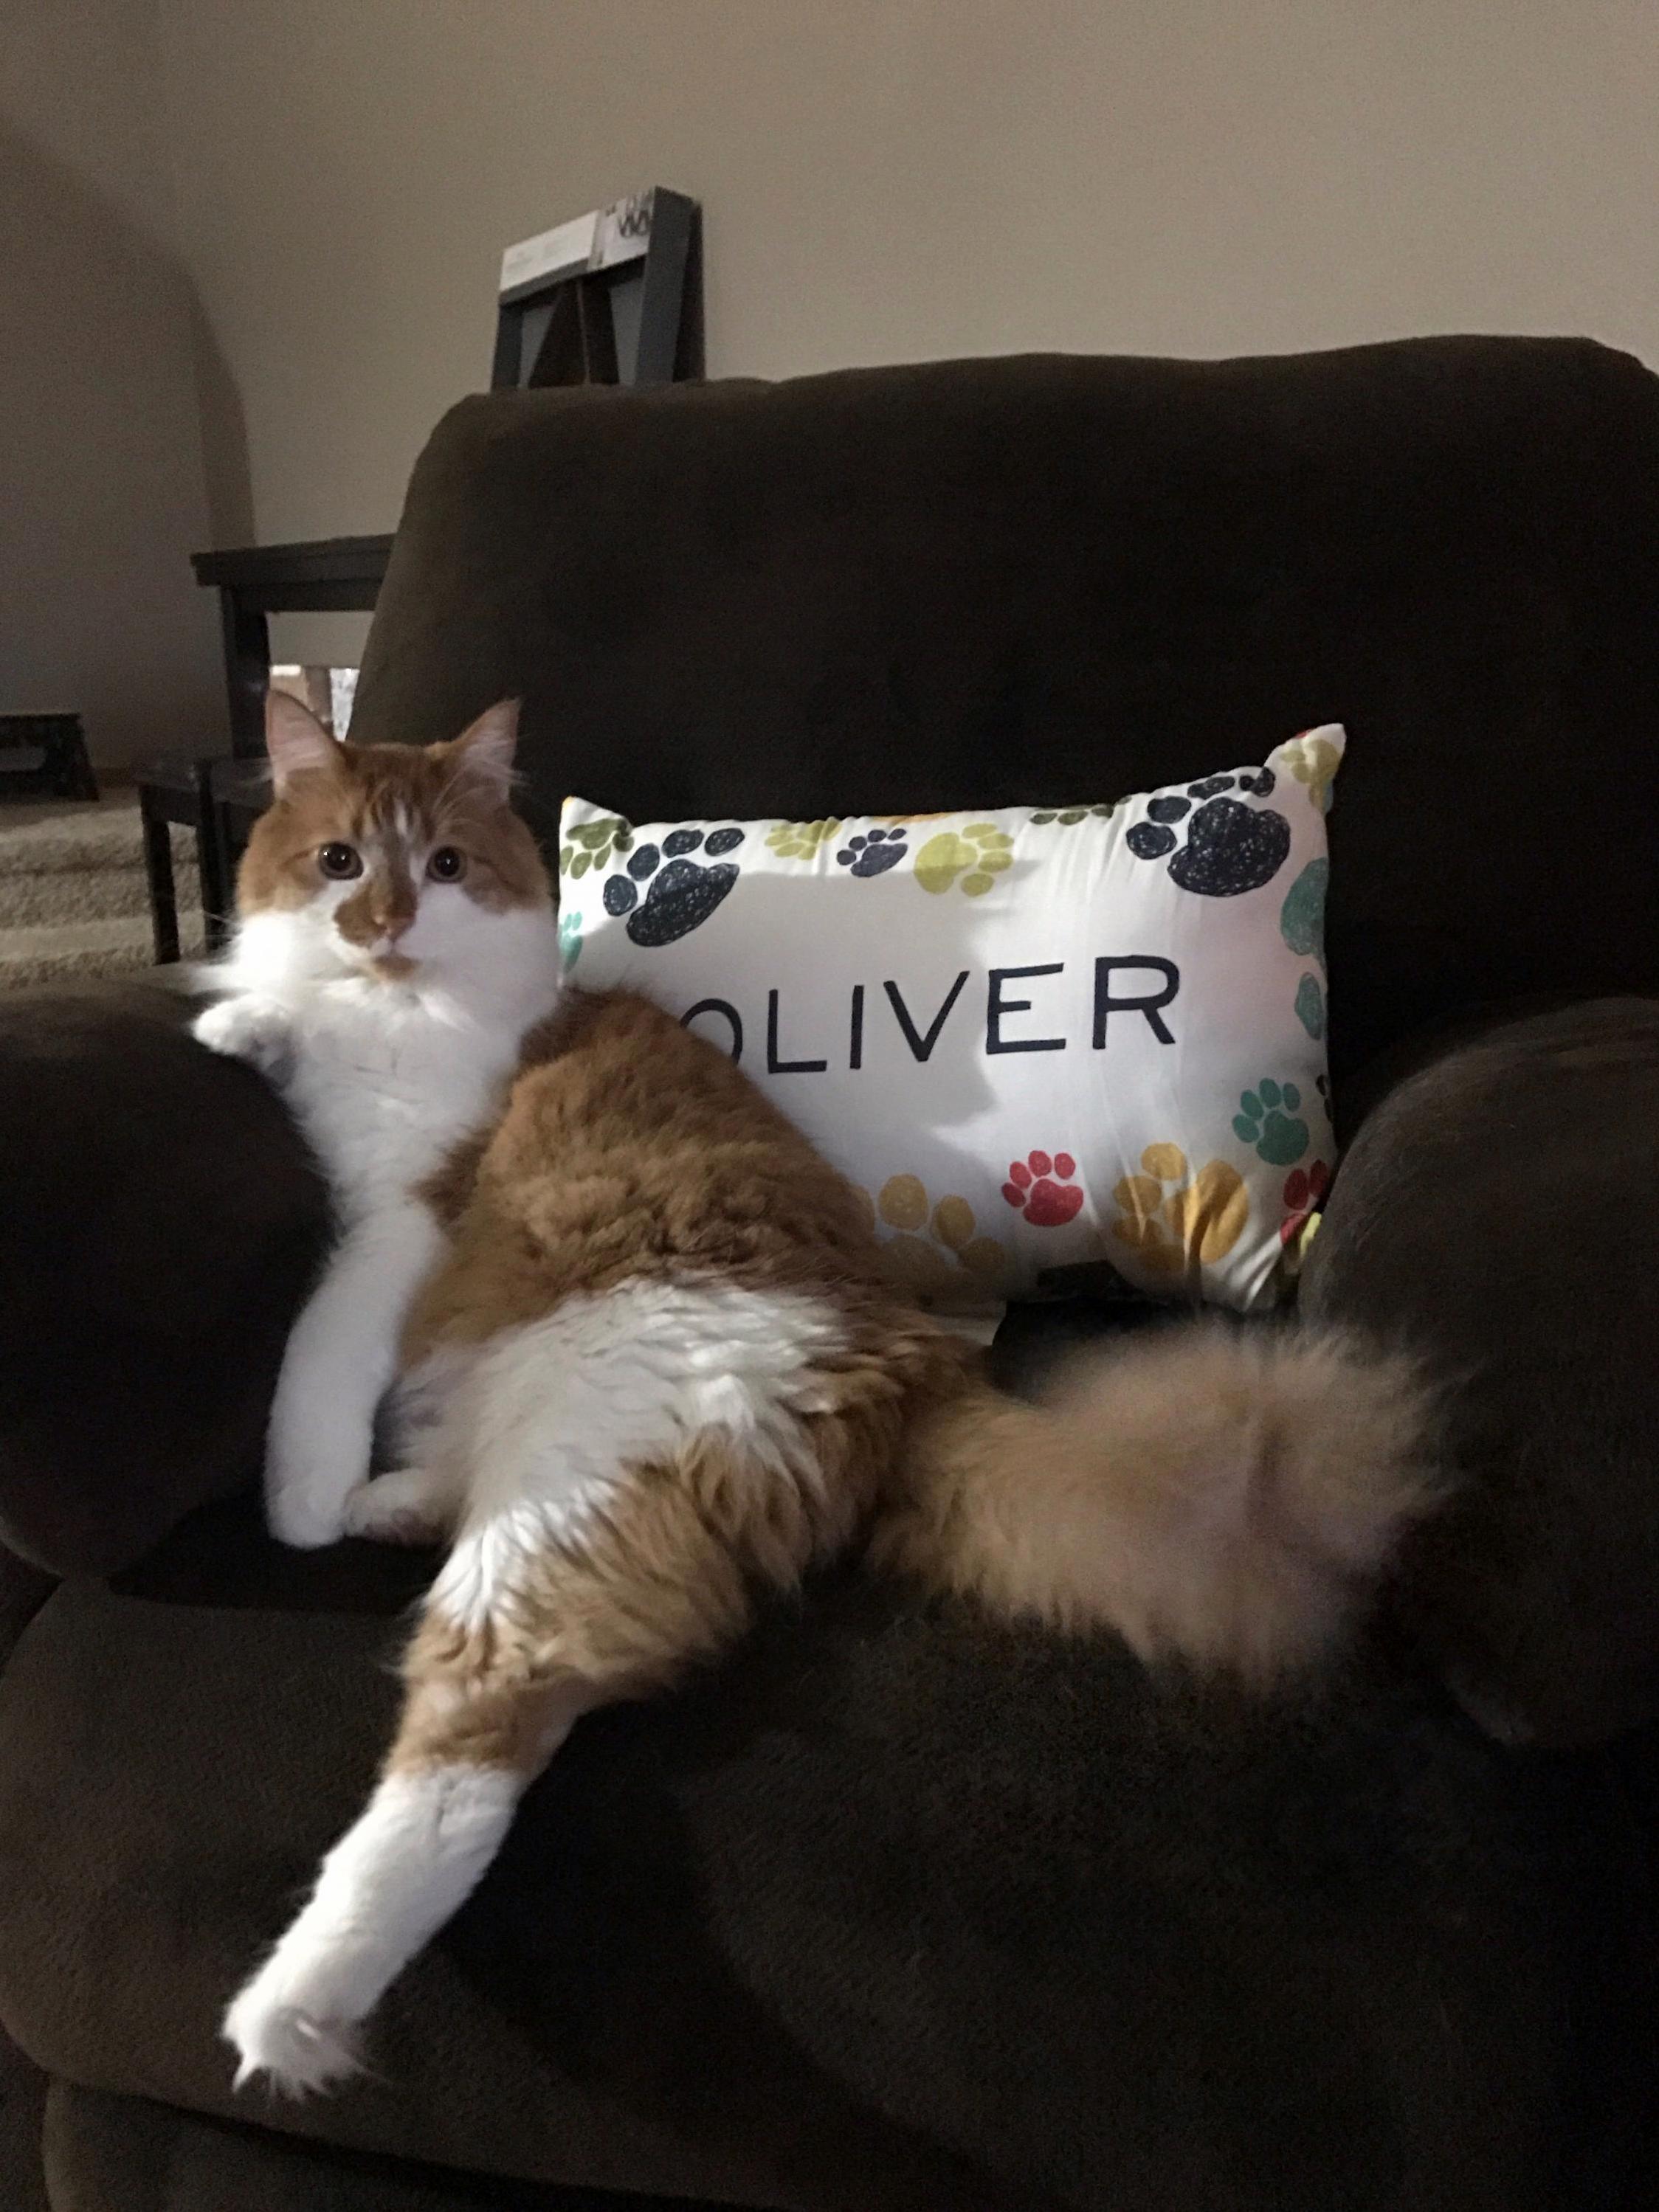 King oliver on his recliner with his pillow.